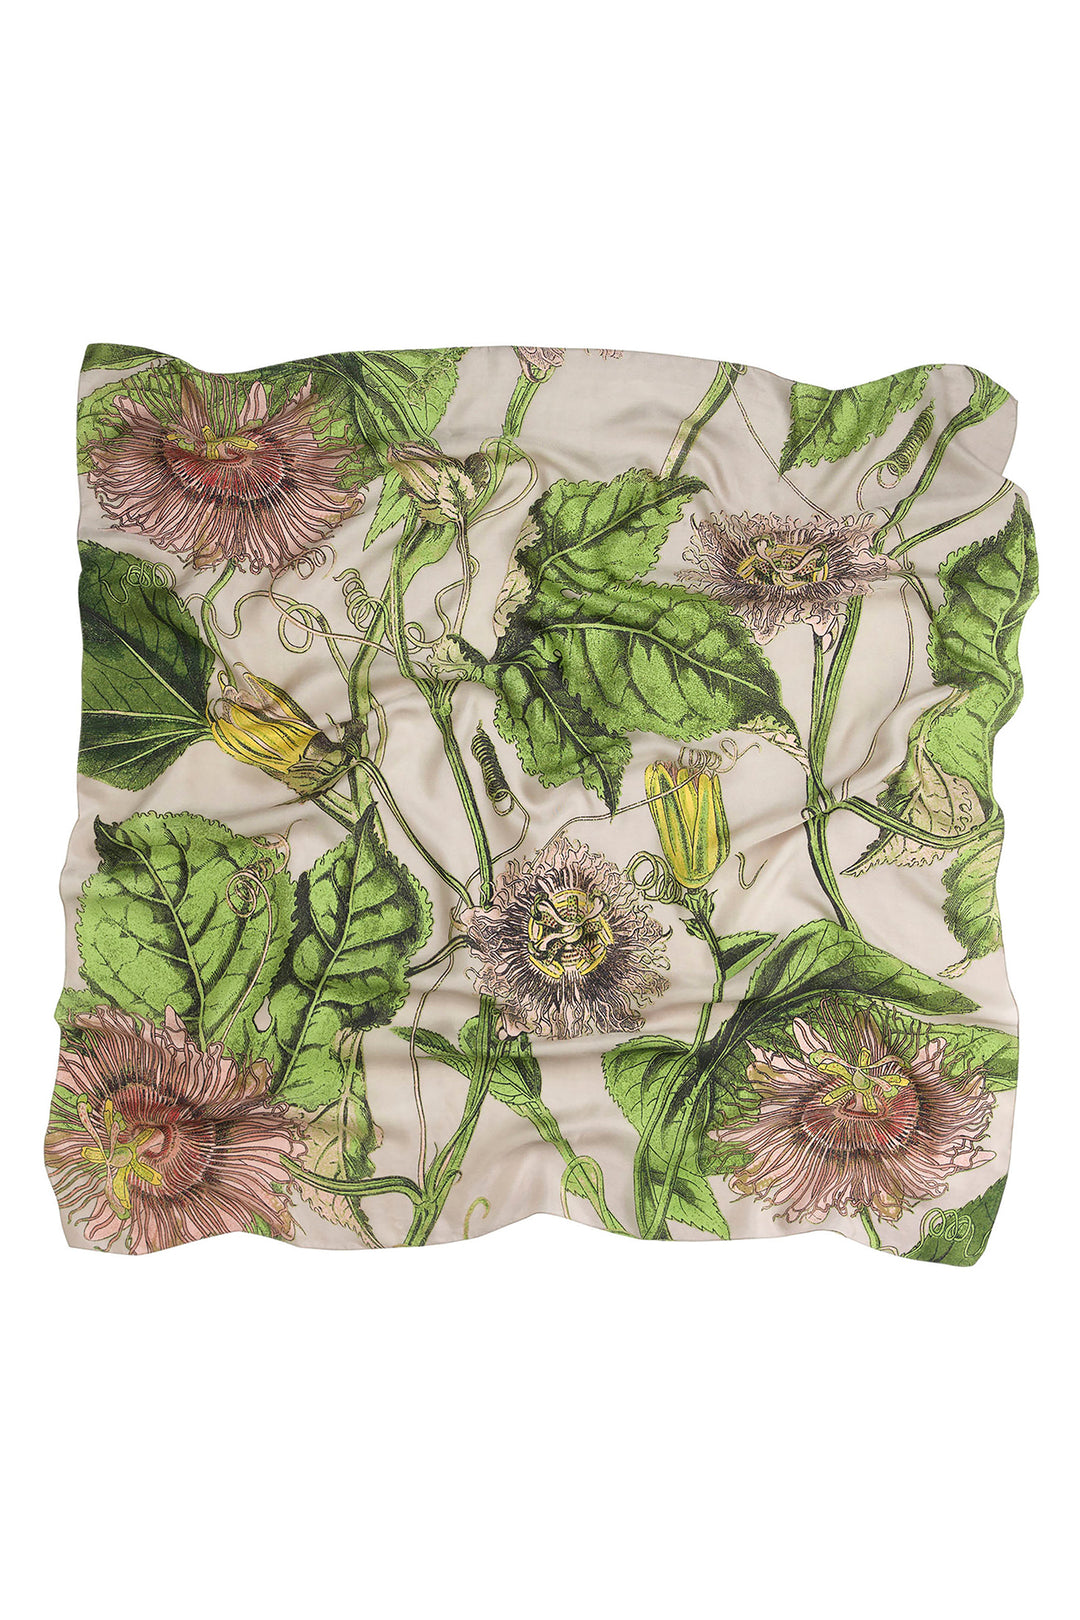 KEW Passion Flower Stone Silk Square Scarf- 100% silk, 100% hand screen printed and a whole 100cm x 100cm of print, this silk scarf oozes luxury whether you wear it knotted around your neck, as a headscarf or fastened around the handle of your favourite handbag. 